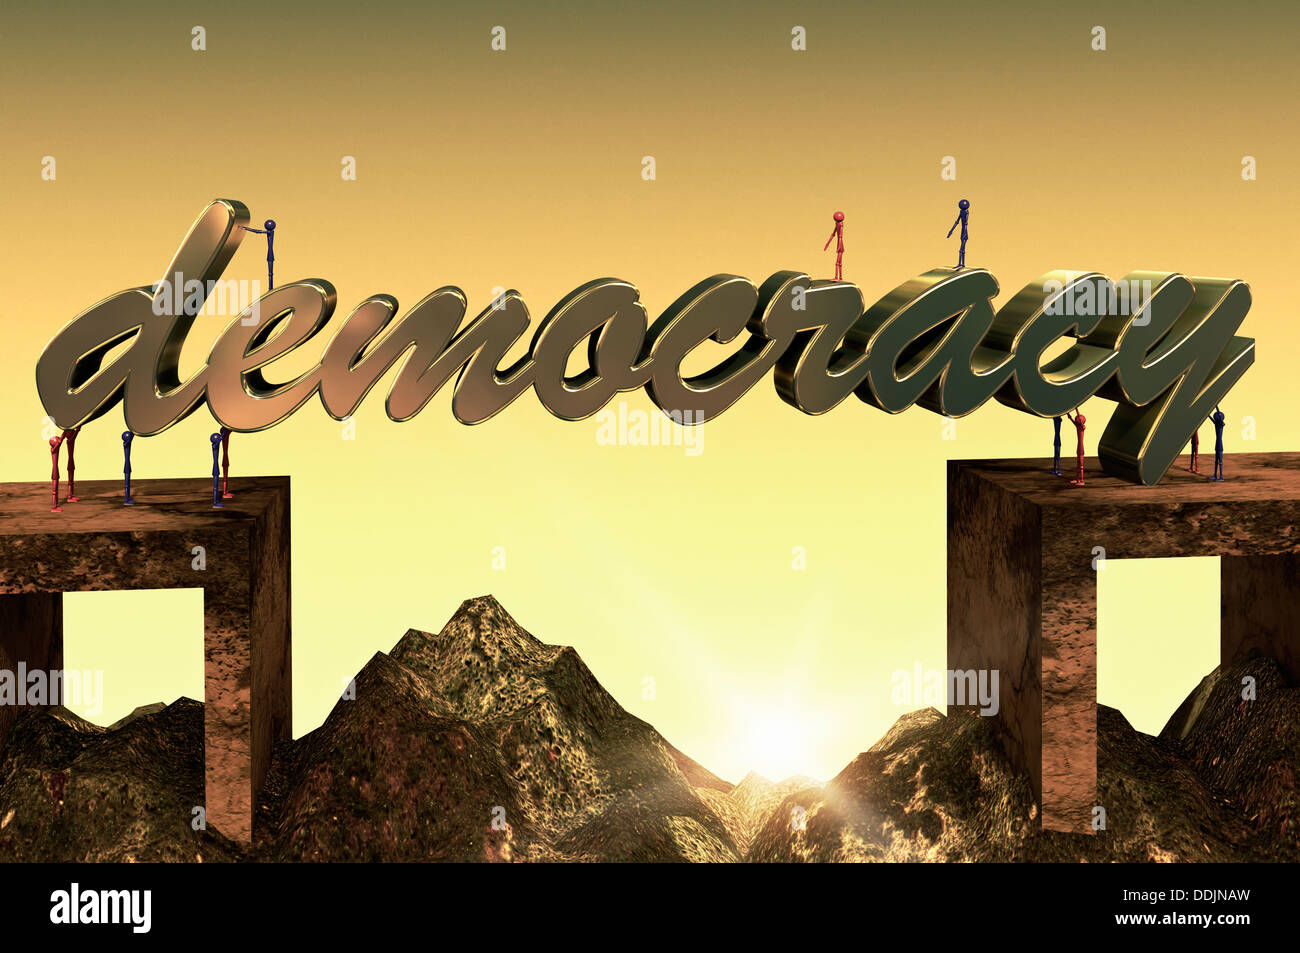 Illustration of the word Democracy in 3d, background a bridge in a landscape. Stock Photo